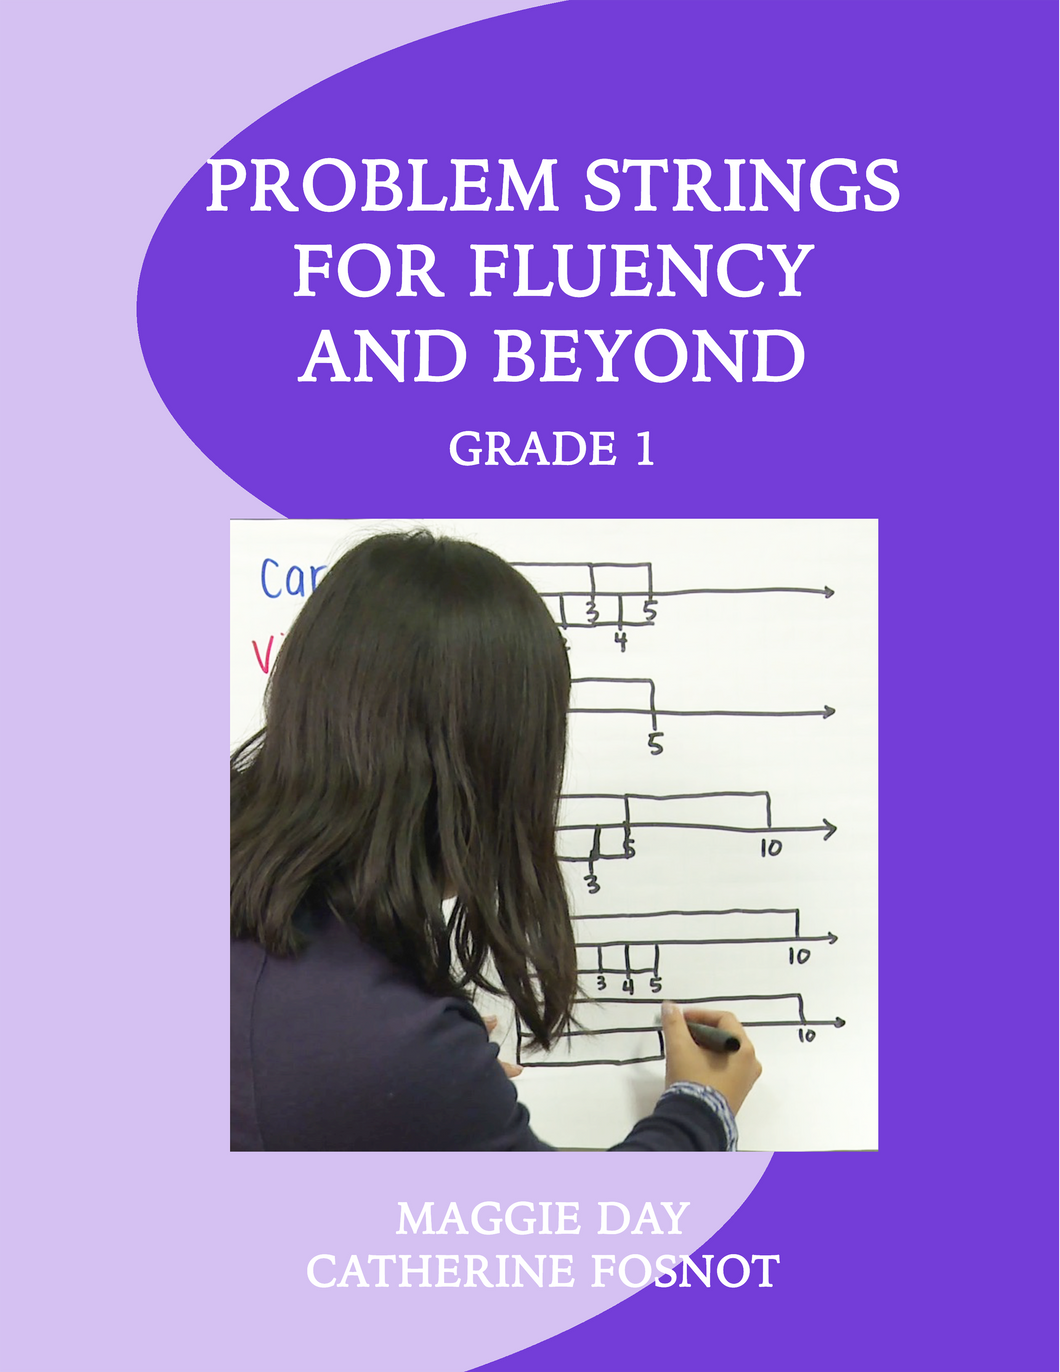 NEW! Problem Strings for Fluency and Beyond - Grade 1